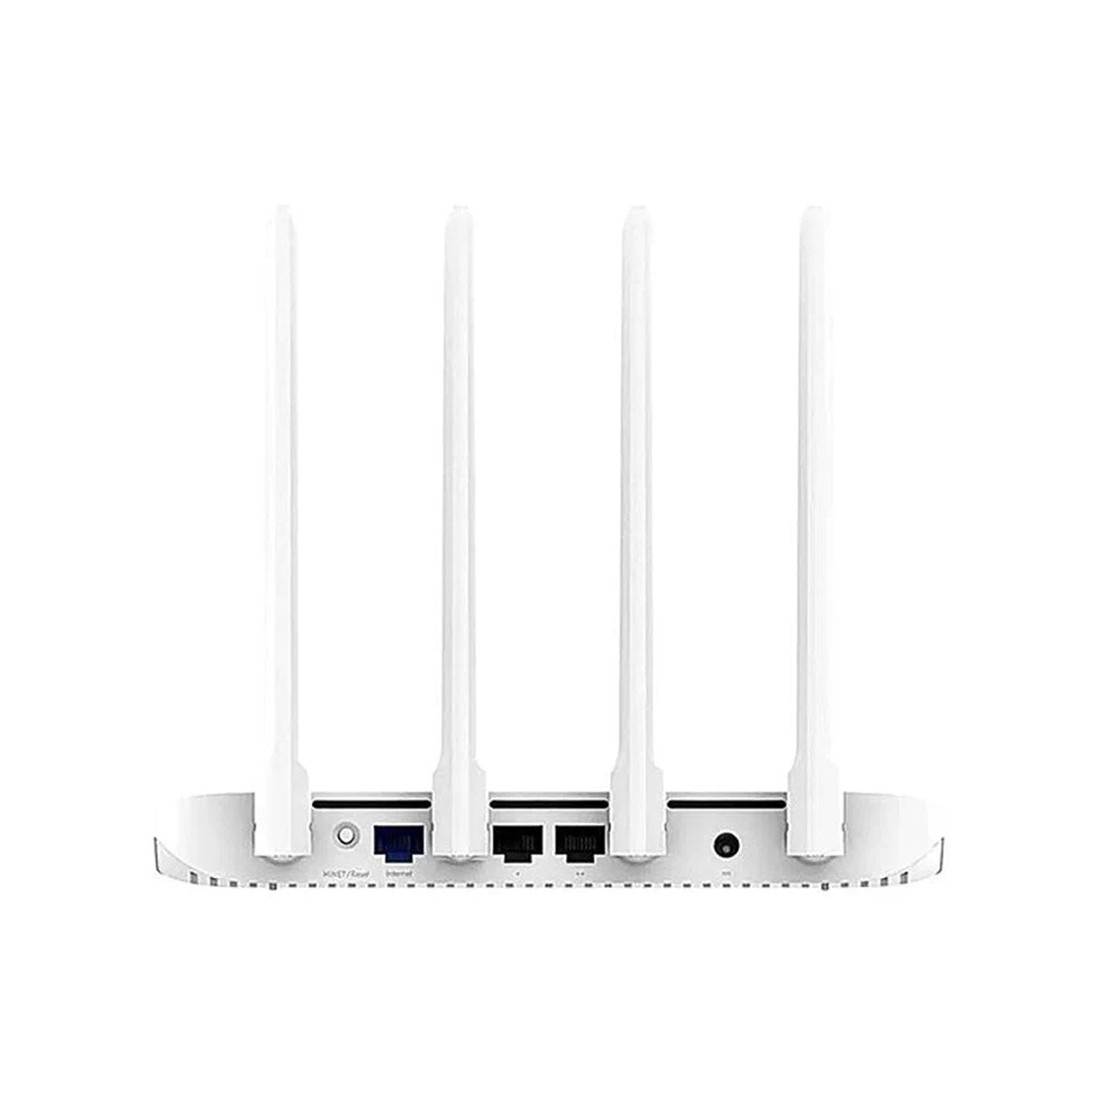 Маршрутизатор Xiaomi Router AC1200 - фото 3 - id-p110824711